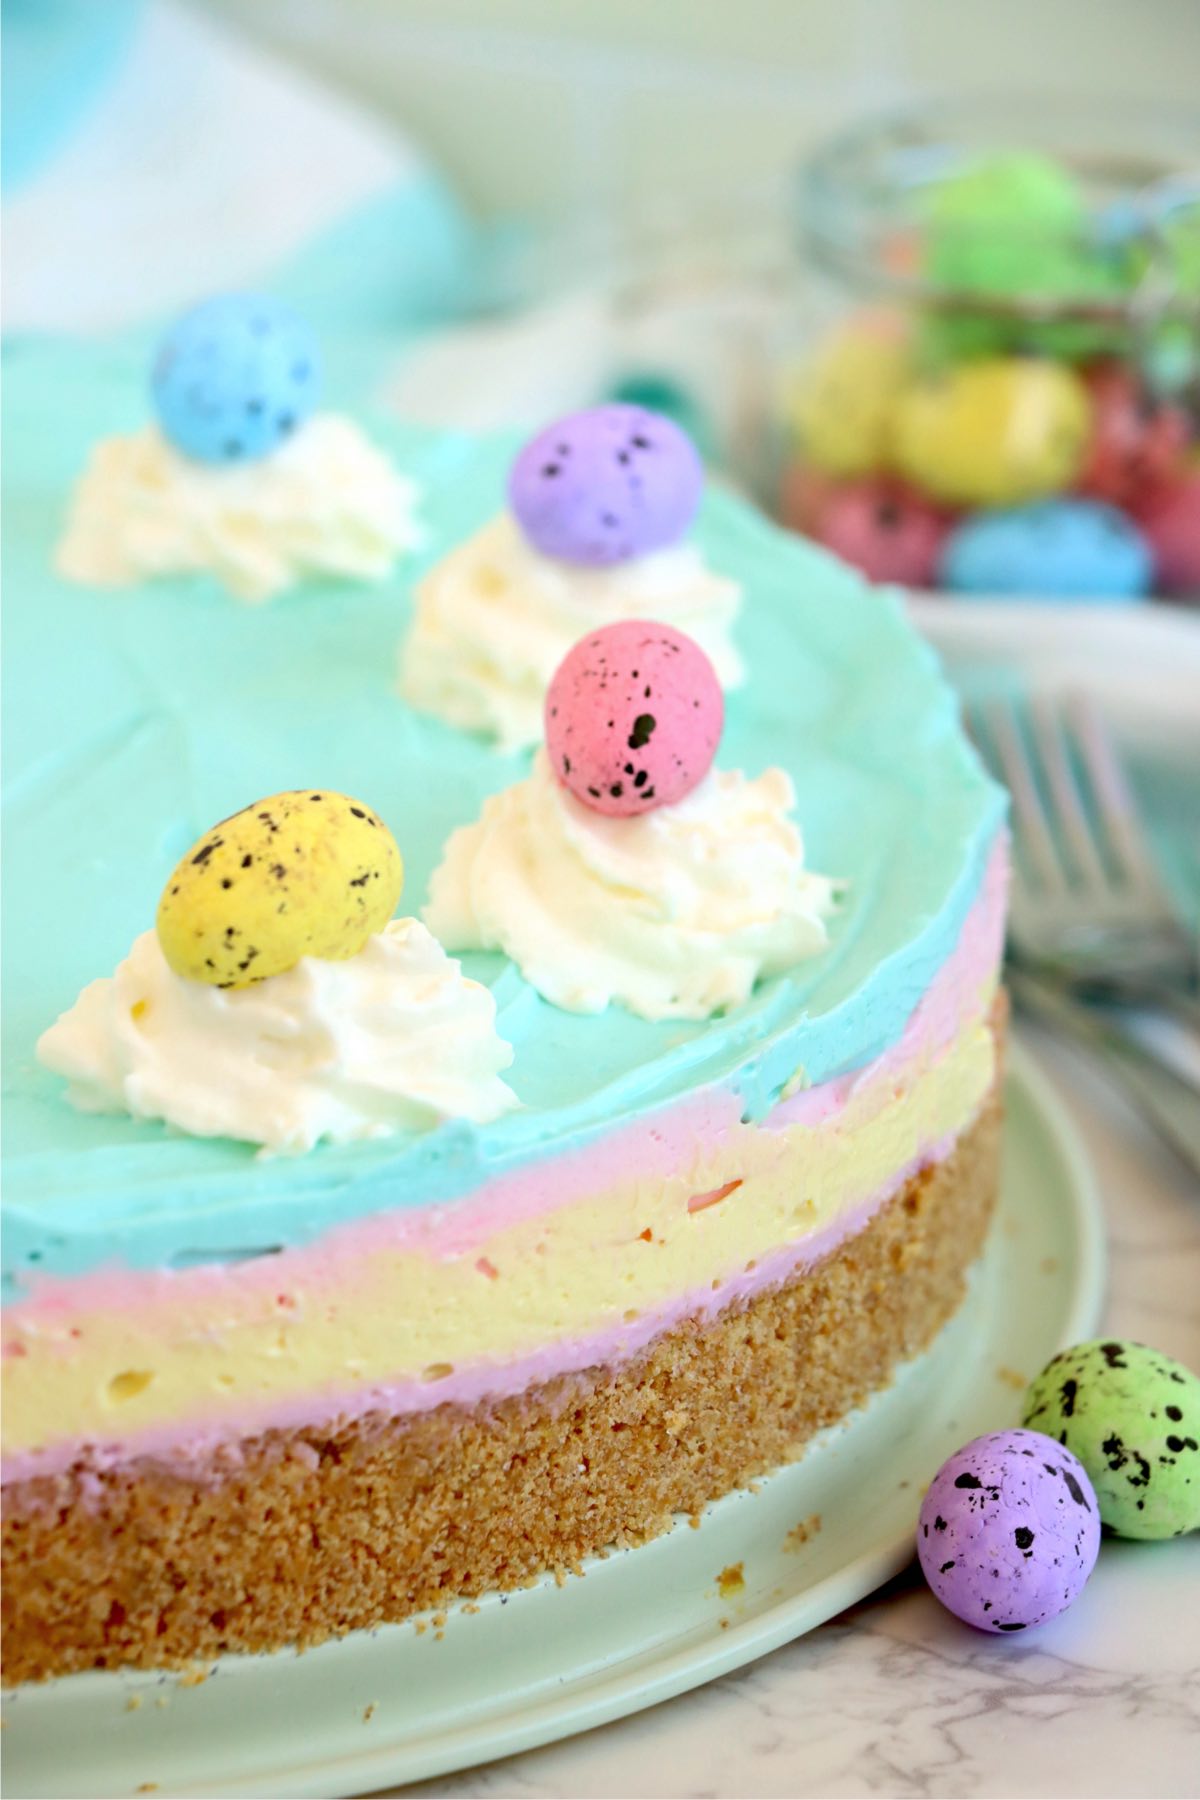 Up close view of a half of an Easter cheesecake